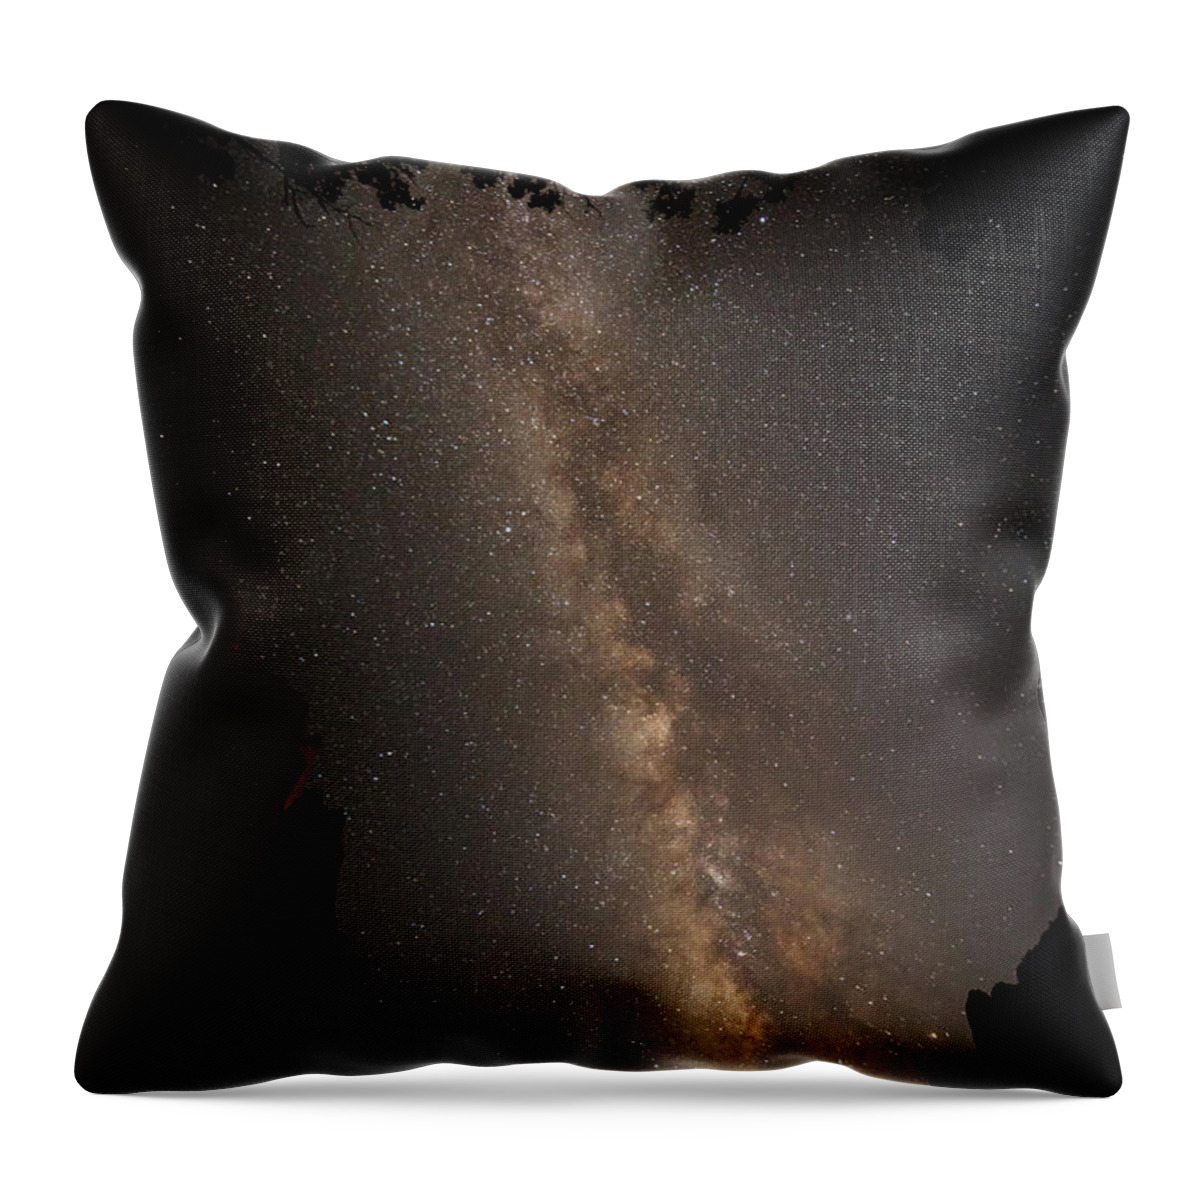 Milkyway Throw Pillow featuring the photograph A Dark Night In Zion Canyon #3 by David Watkins